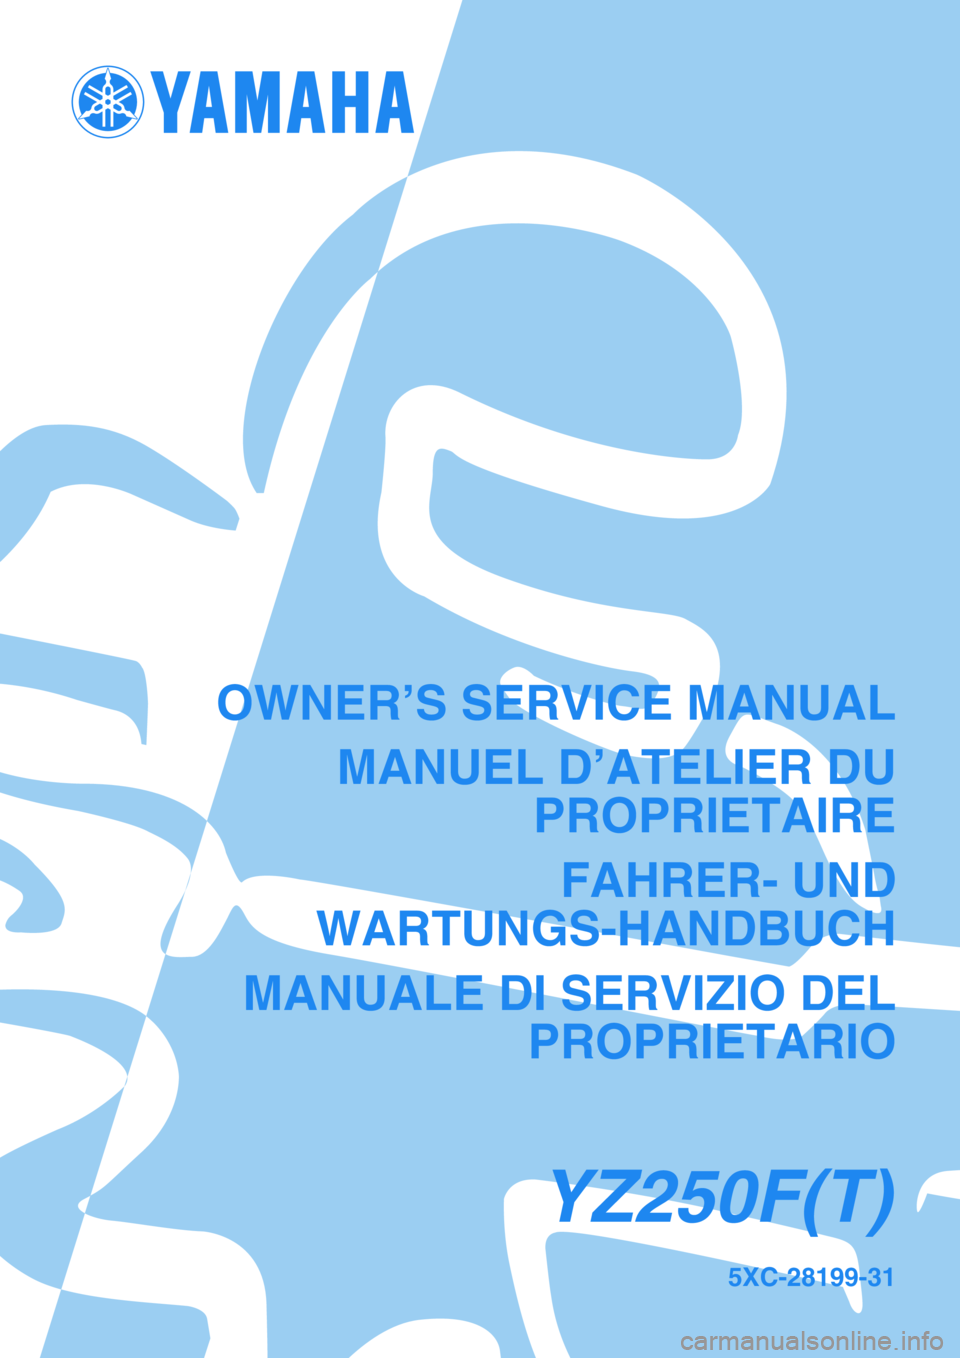 YAMAHA YZ250F 2005  Owners Manual 5XC-28199-31
YZ250F(T)
OWNER’S SERVICE MANUAL
MANUEL D’ATELIER DU
PROPRIETAIRE
FAHRER- UND
WARTUNGS-HANDBUCH
MANUALE DI SERVIZIO DEL
PROPRIETARIO 